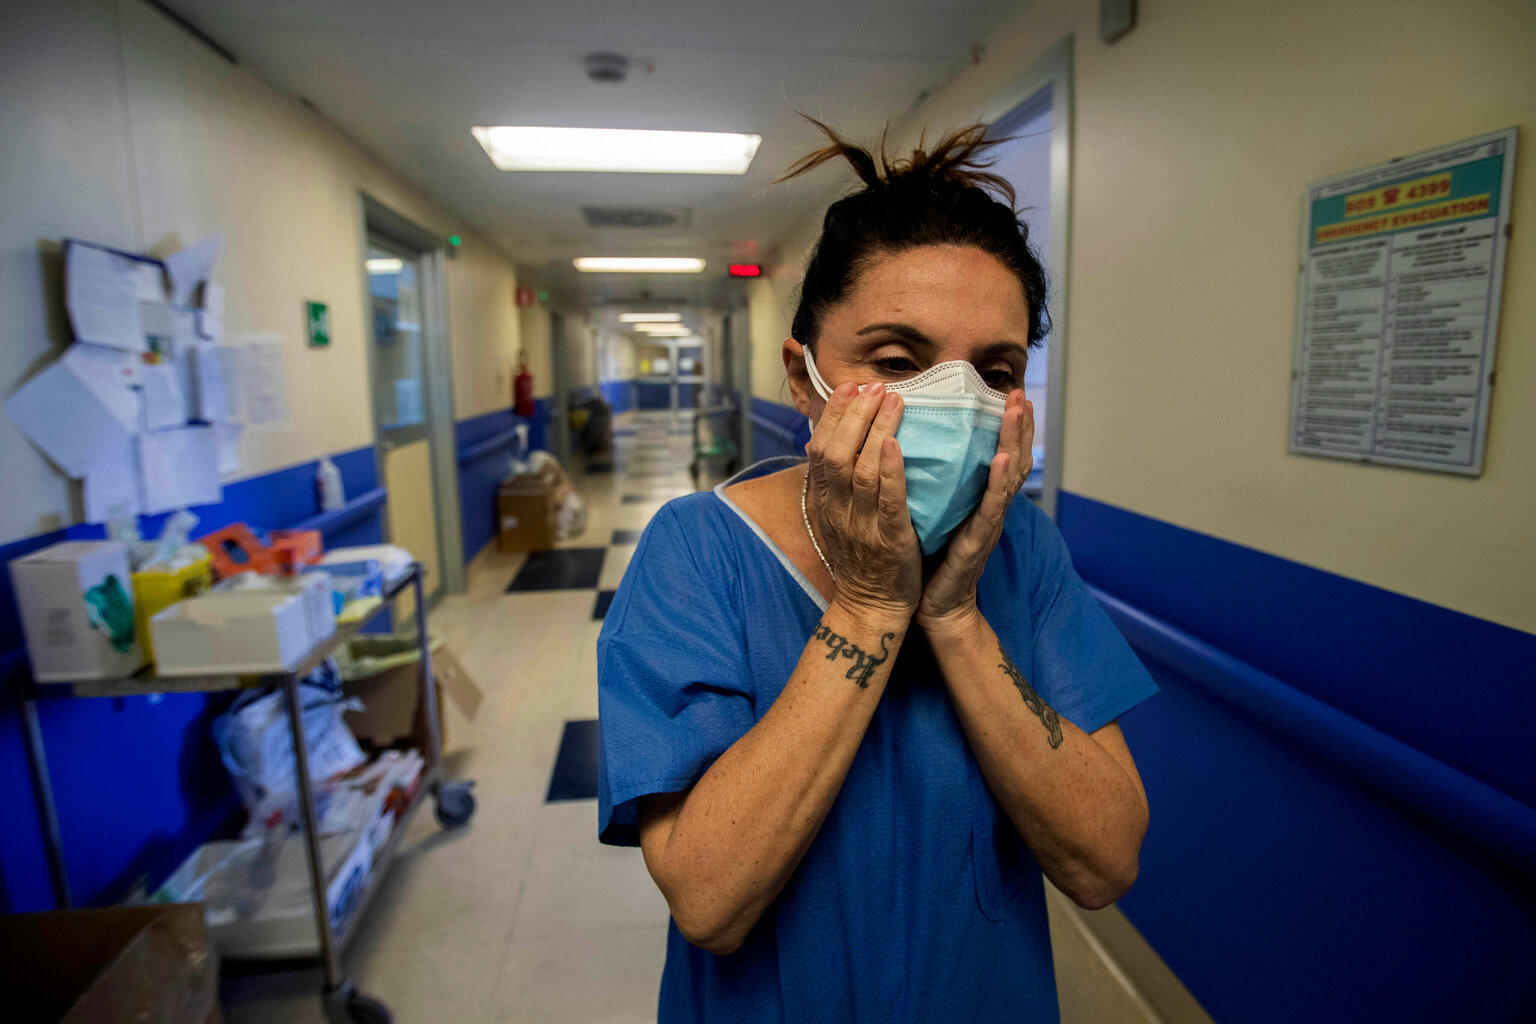  In this photo taken on Friday, April 10, 2020 nurse Cristina Settembrese fixes two masks to her face during her work shift in the COVID-19 ward at the San Paolo hospital in Milan, Italy. Settembrese spends her days caring for COVID-19 patients in a 